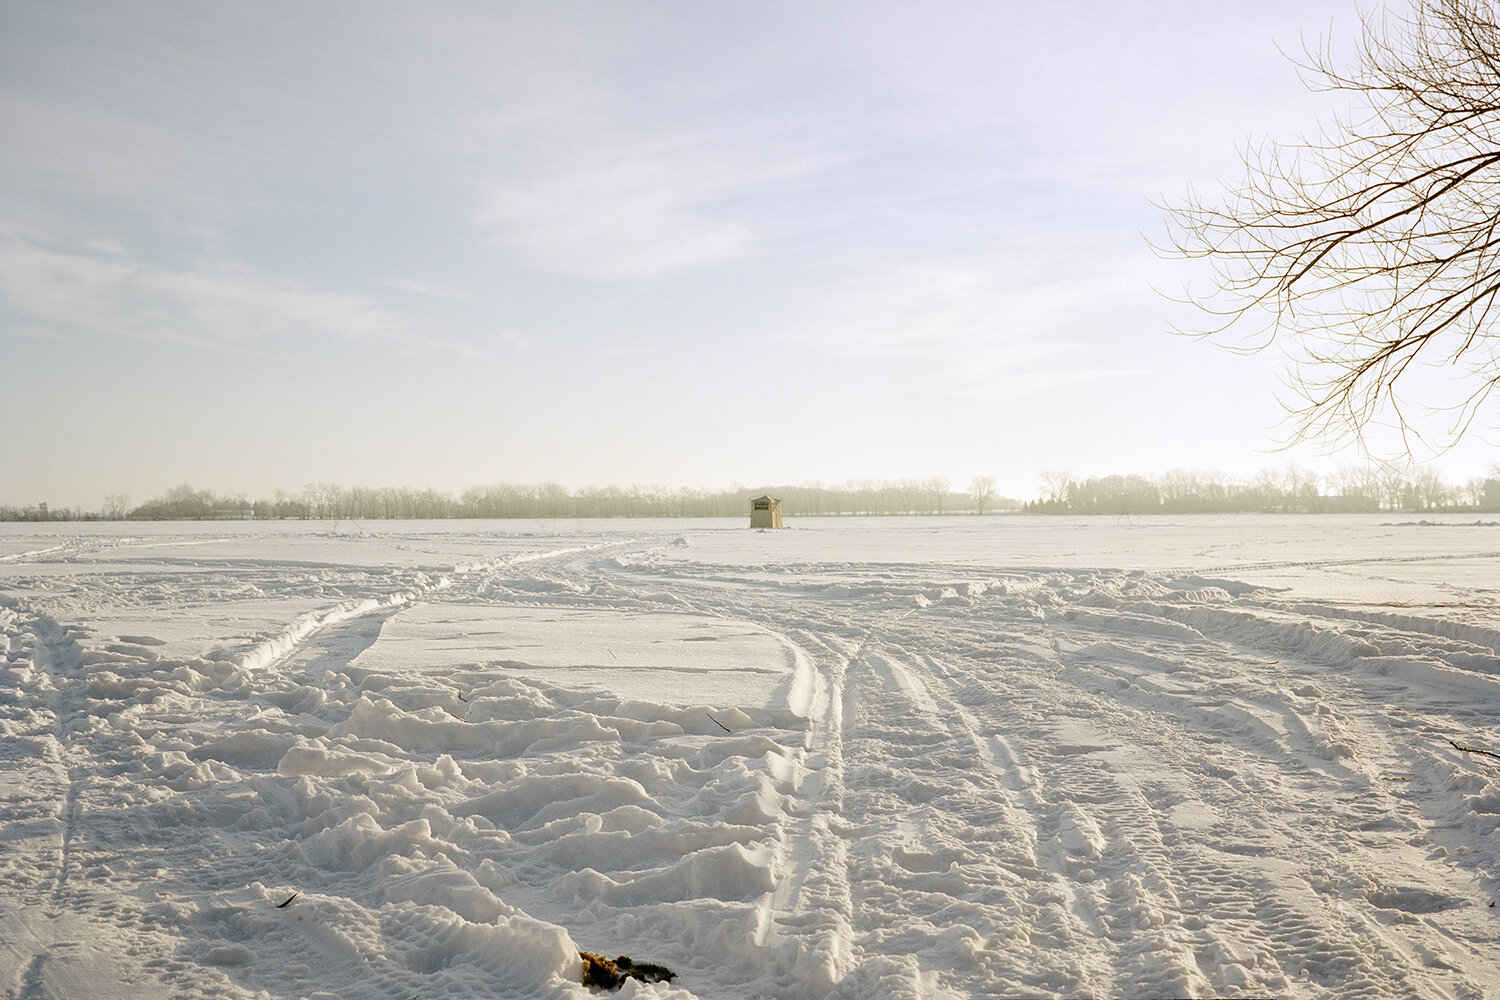  Alanna Styer   Ice Fishing,  2019  From the series: A Prairie, Not a Promise  Digital Inkjet Print  